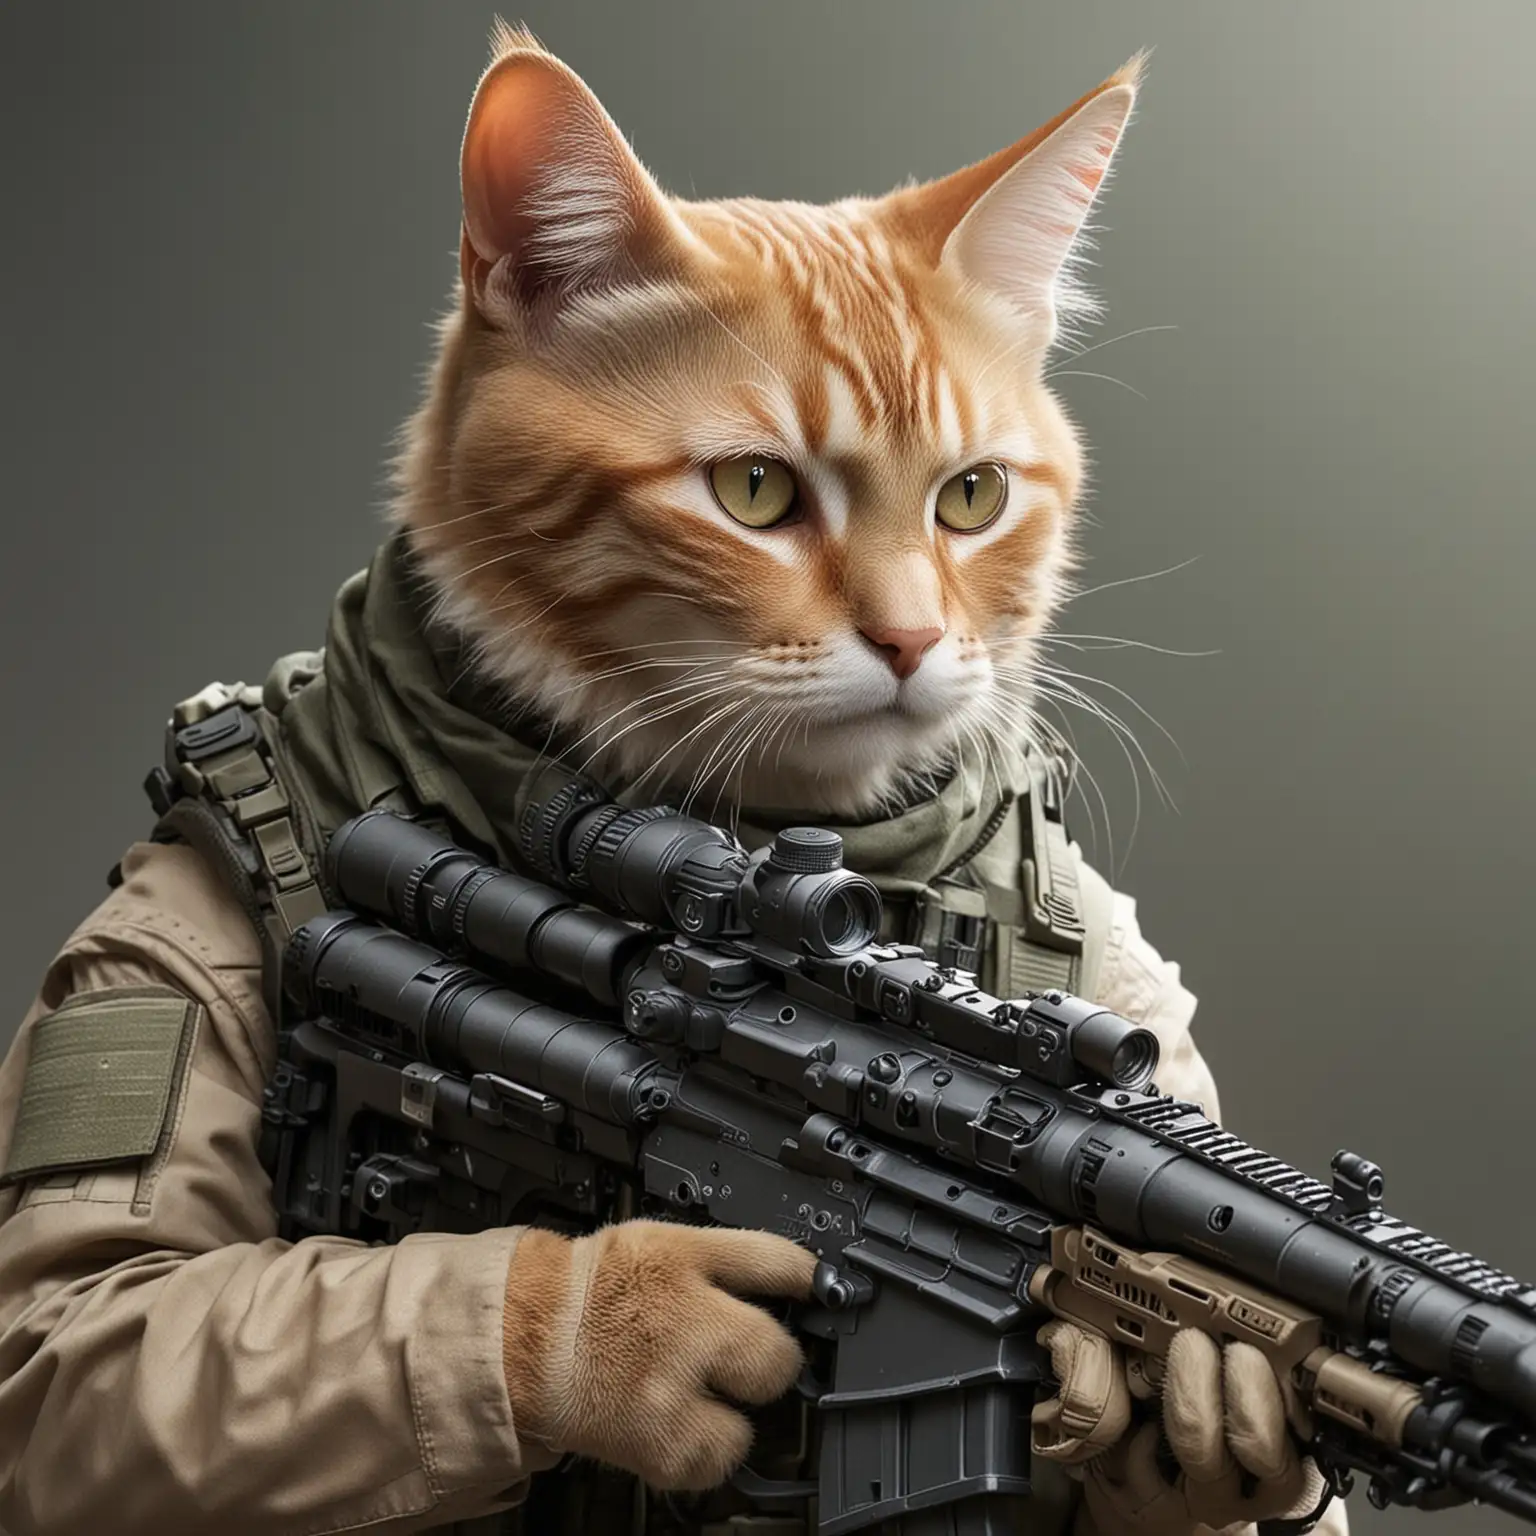 Stealthy Feline Sniper Ready for Action